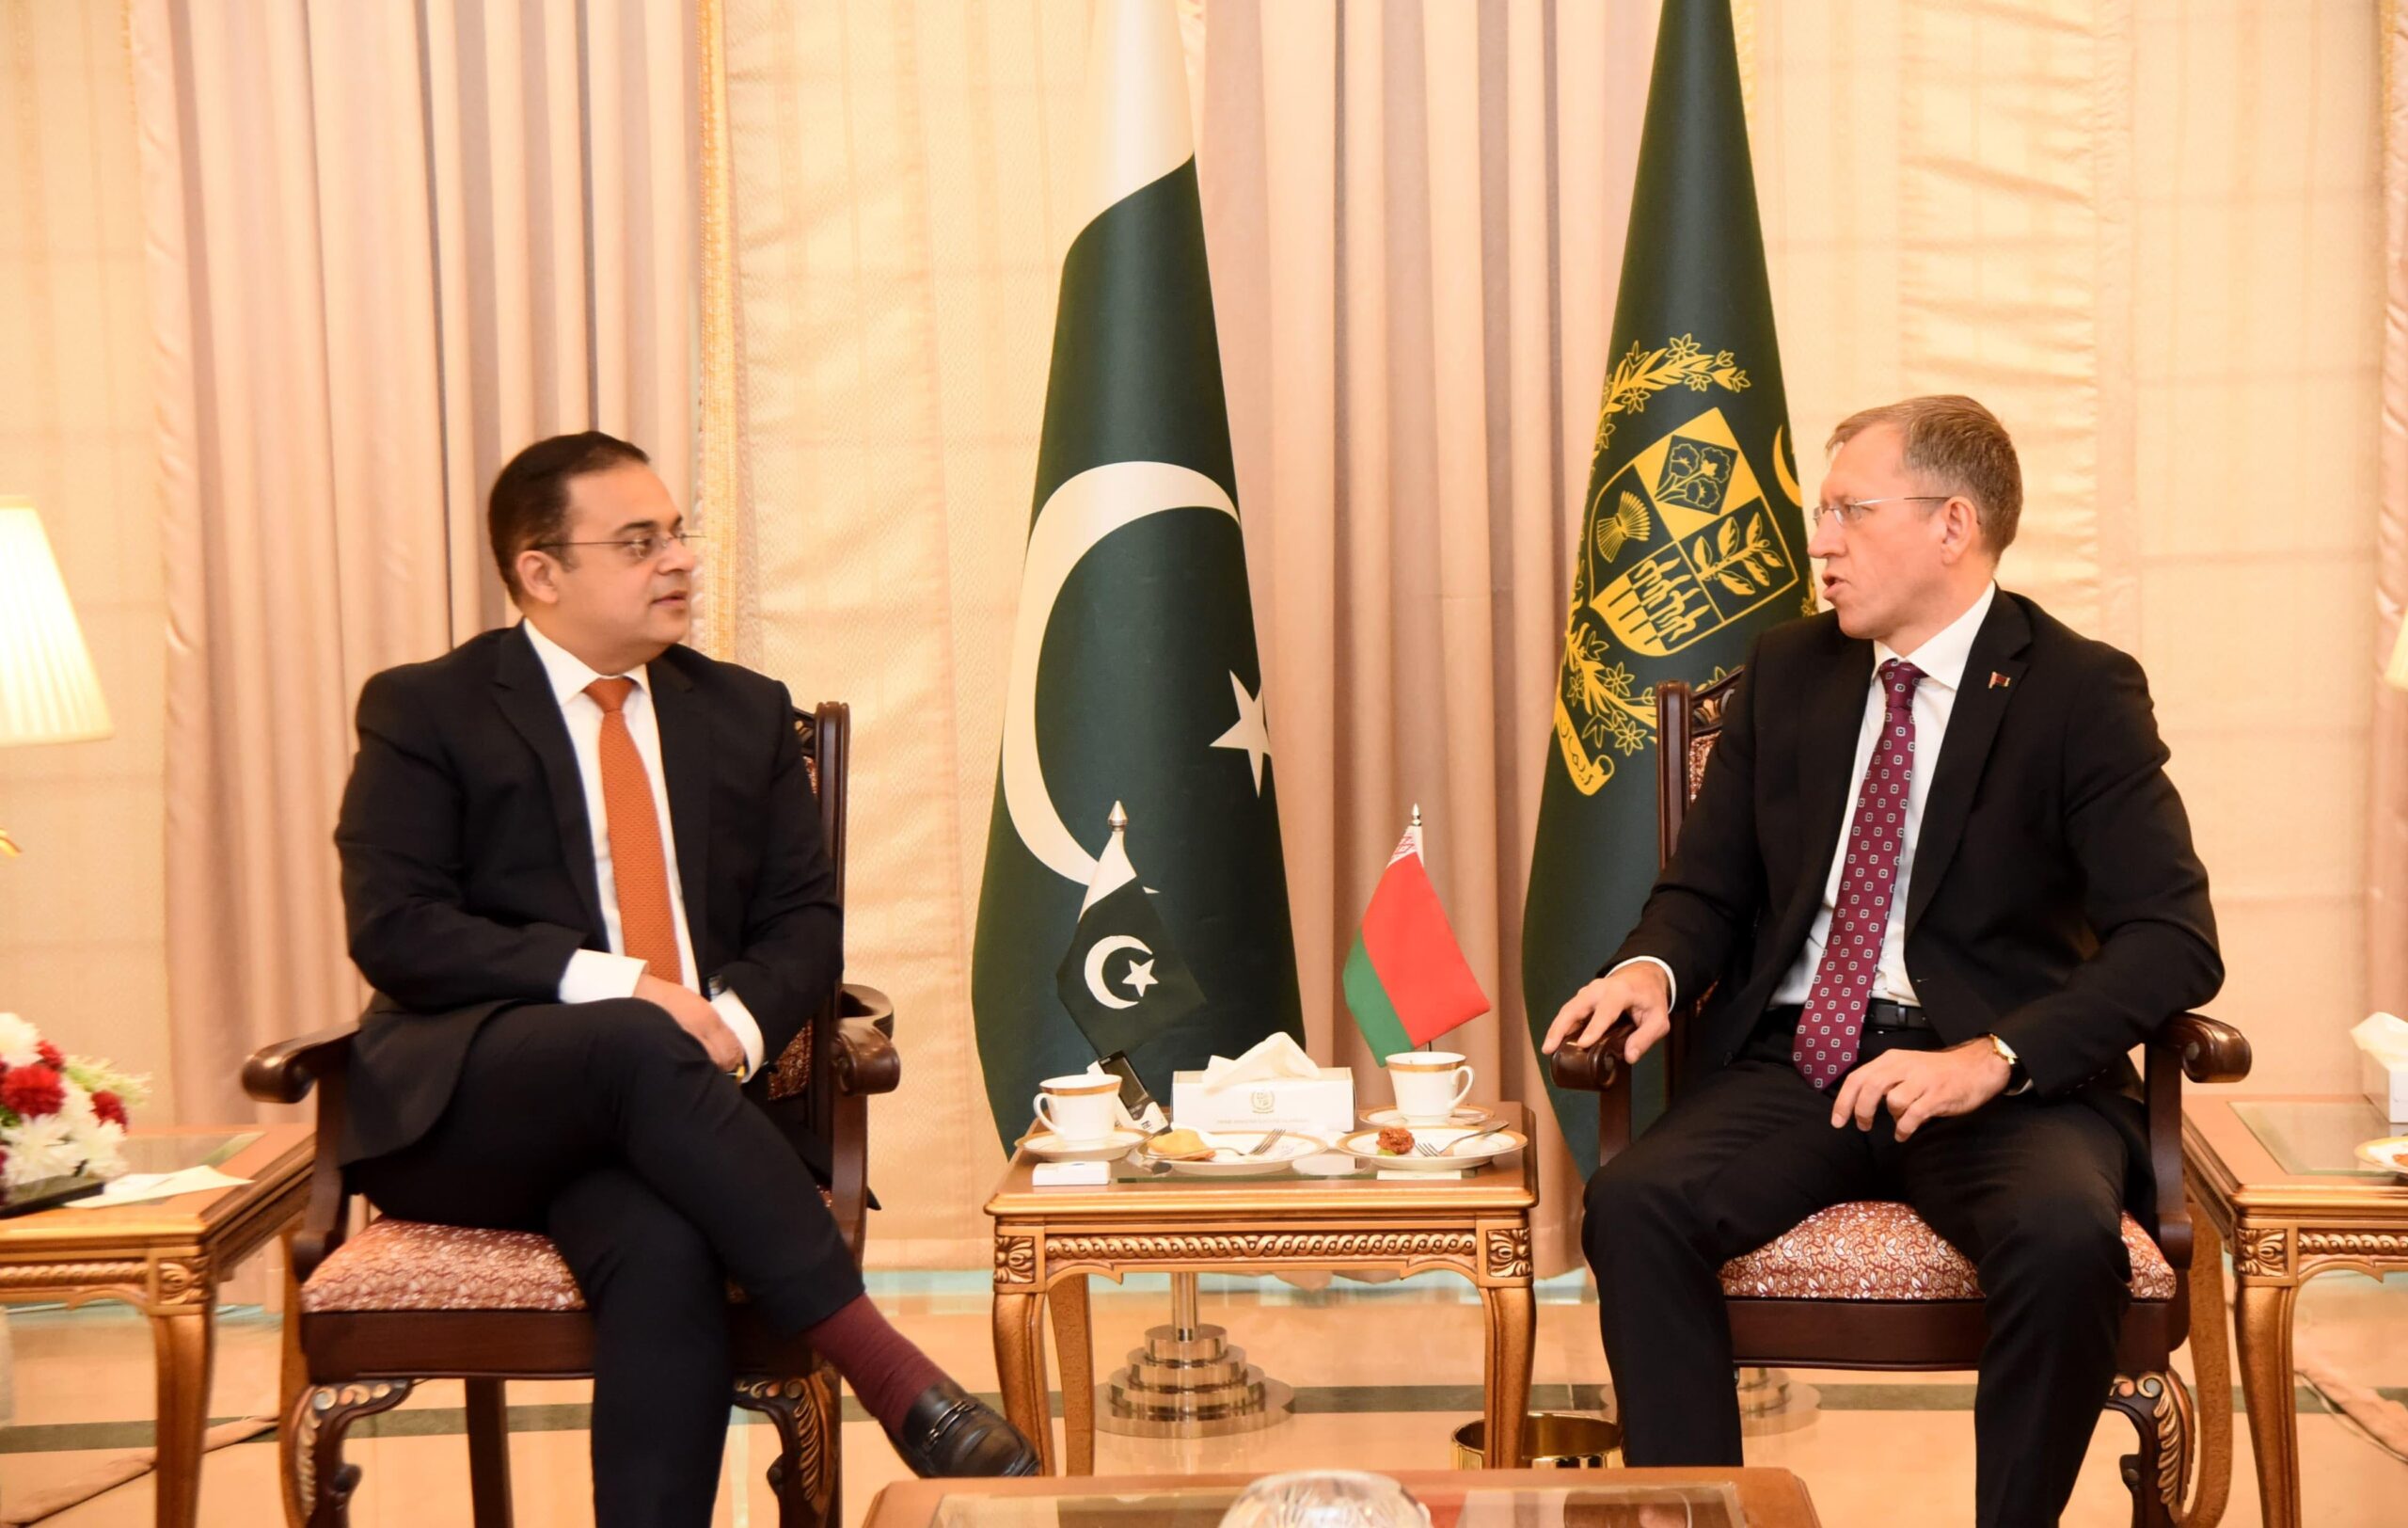 AMBASSADOR OF THE REPUBLIC OF BELARUS CALLS ON THE FEDERAL MINISTER FOR ECONOMIC AFFAIRS.